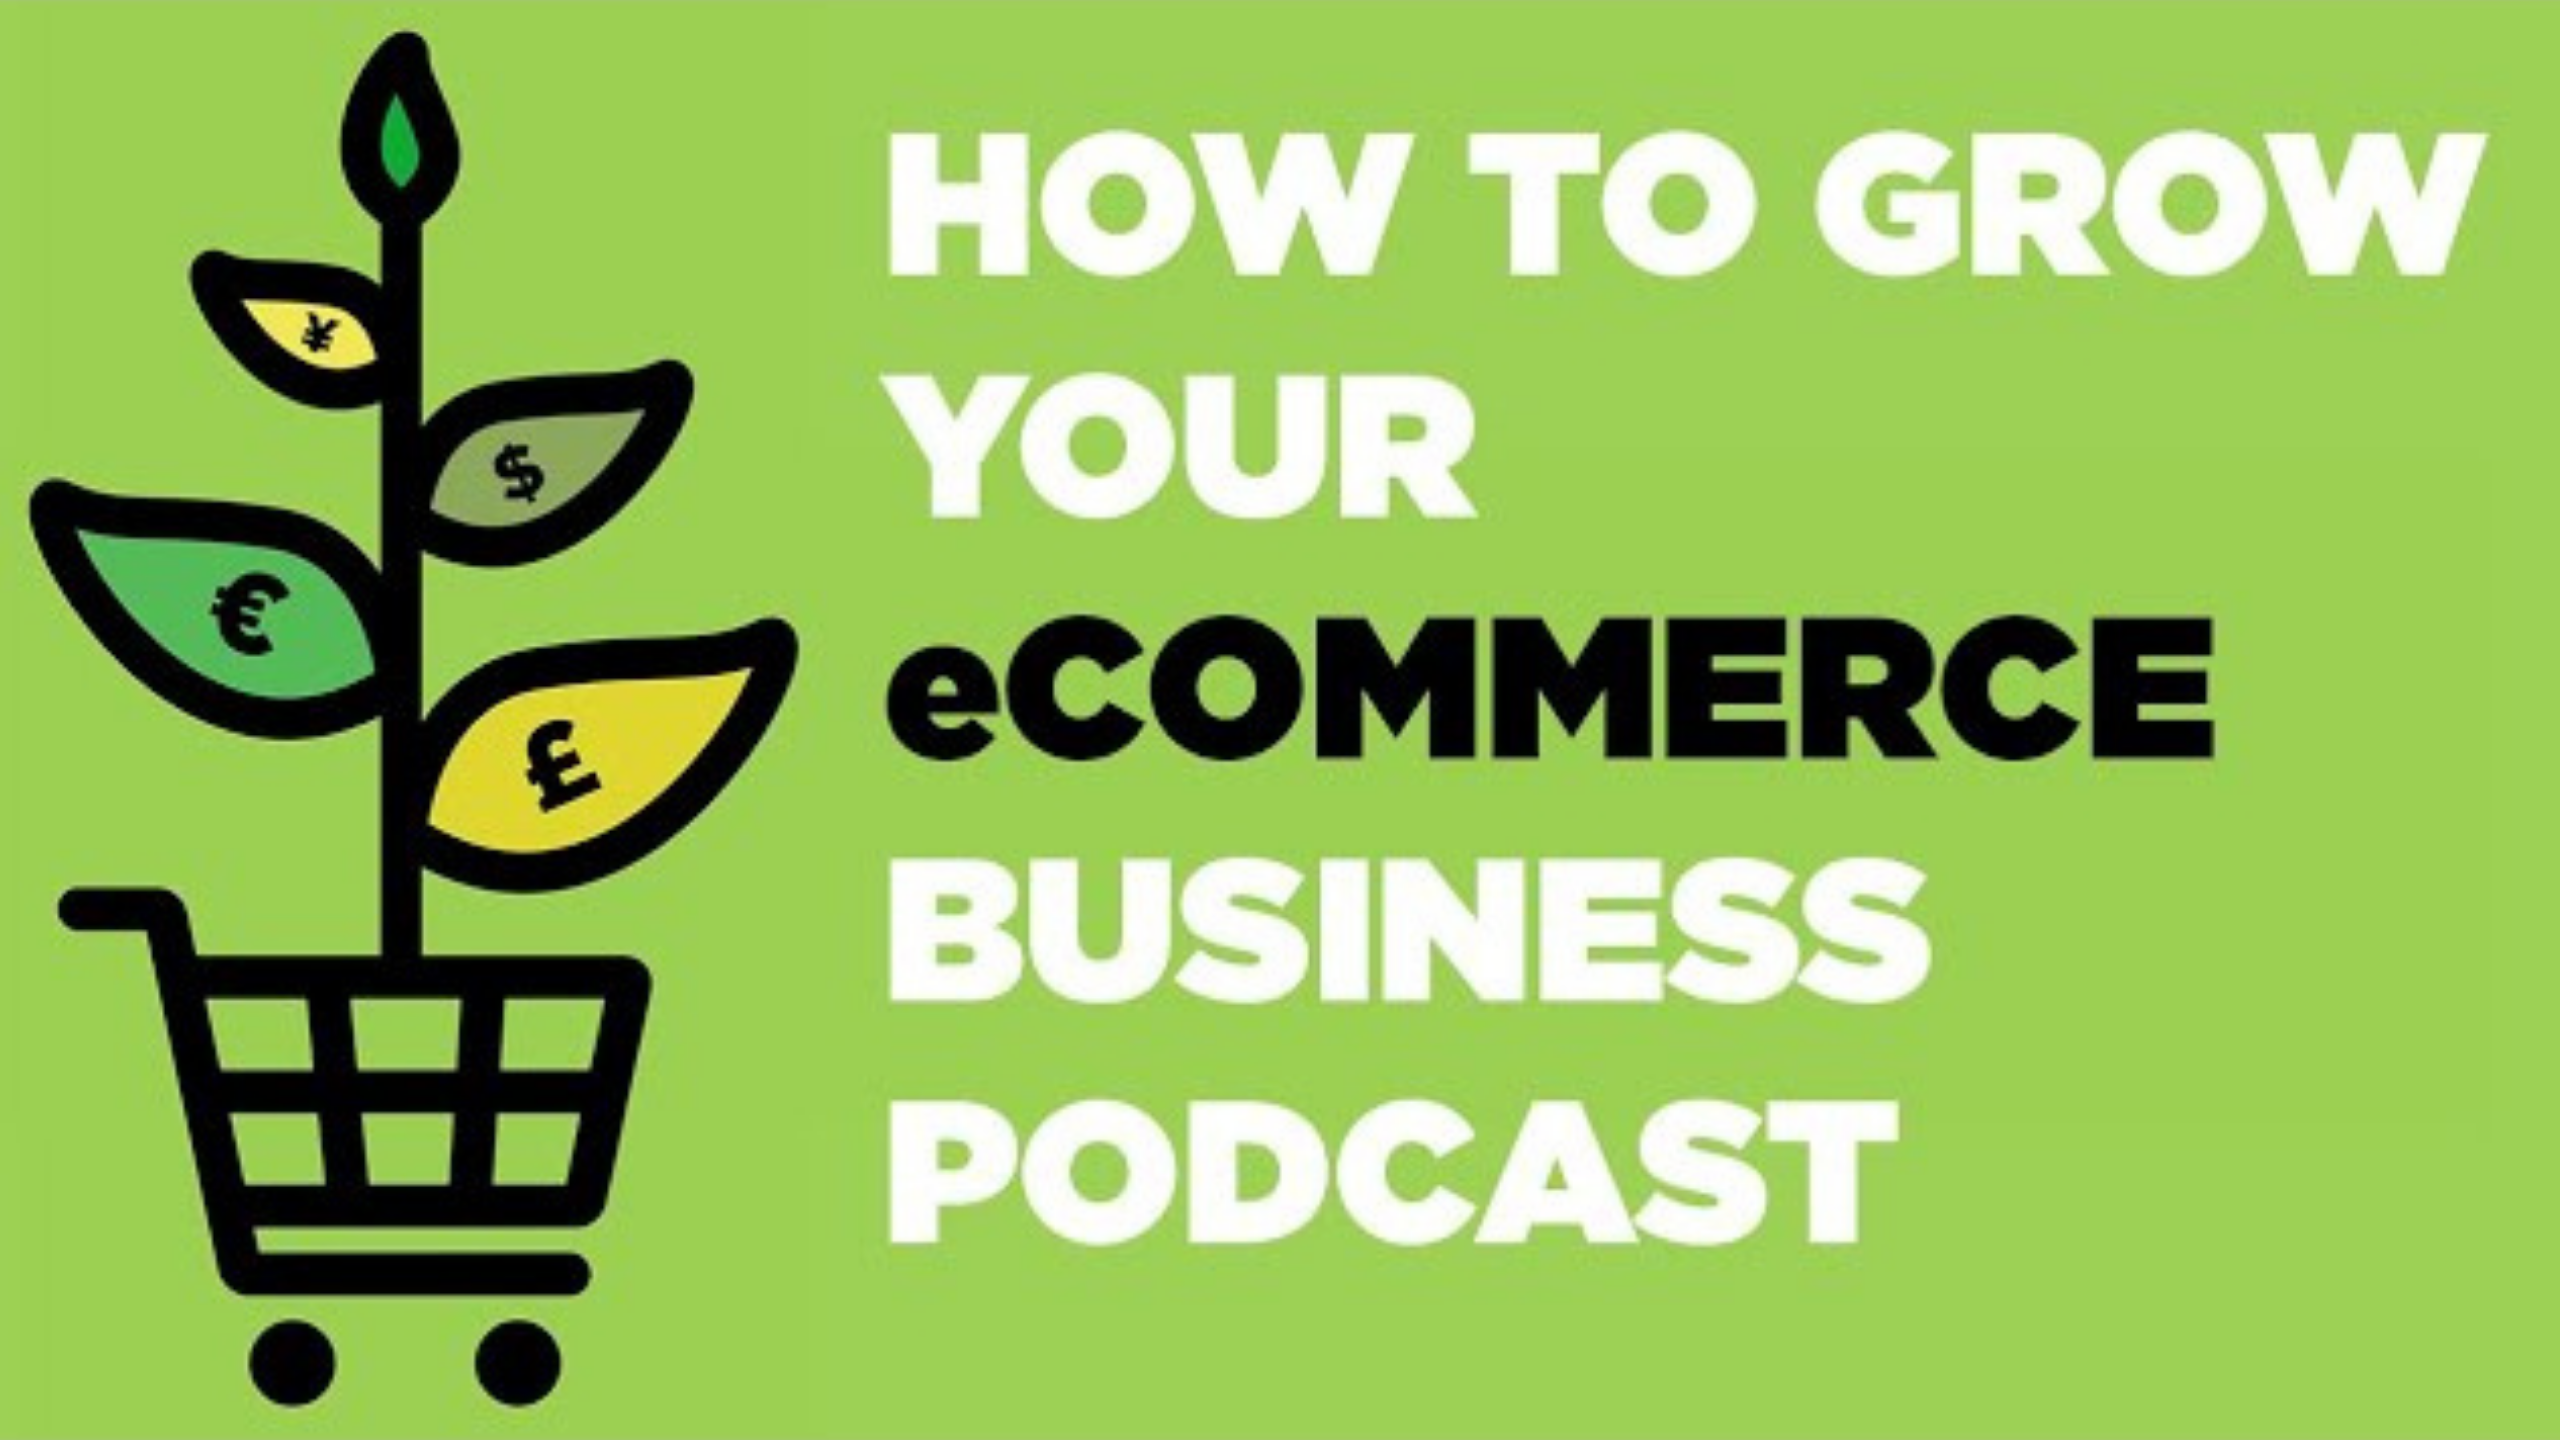 Image promoting a podcast titled "How to Grow Your eCommerce Business Podcast." The graphic features a shopping cart with a plant growing out of it, with currency symbols on the leaves. The background is green with white and black text.